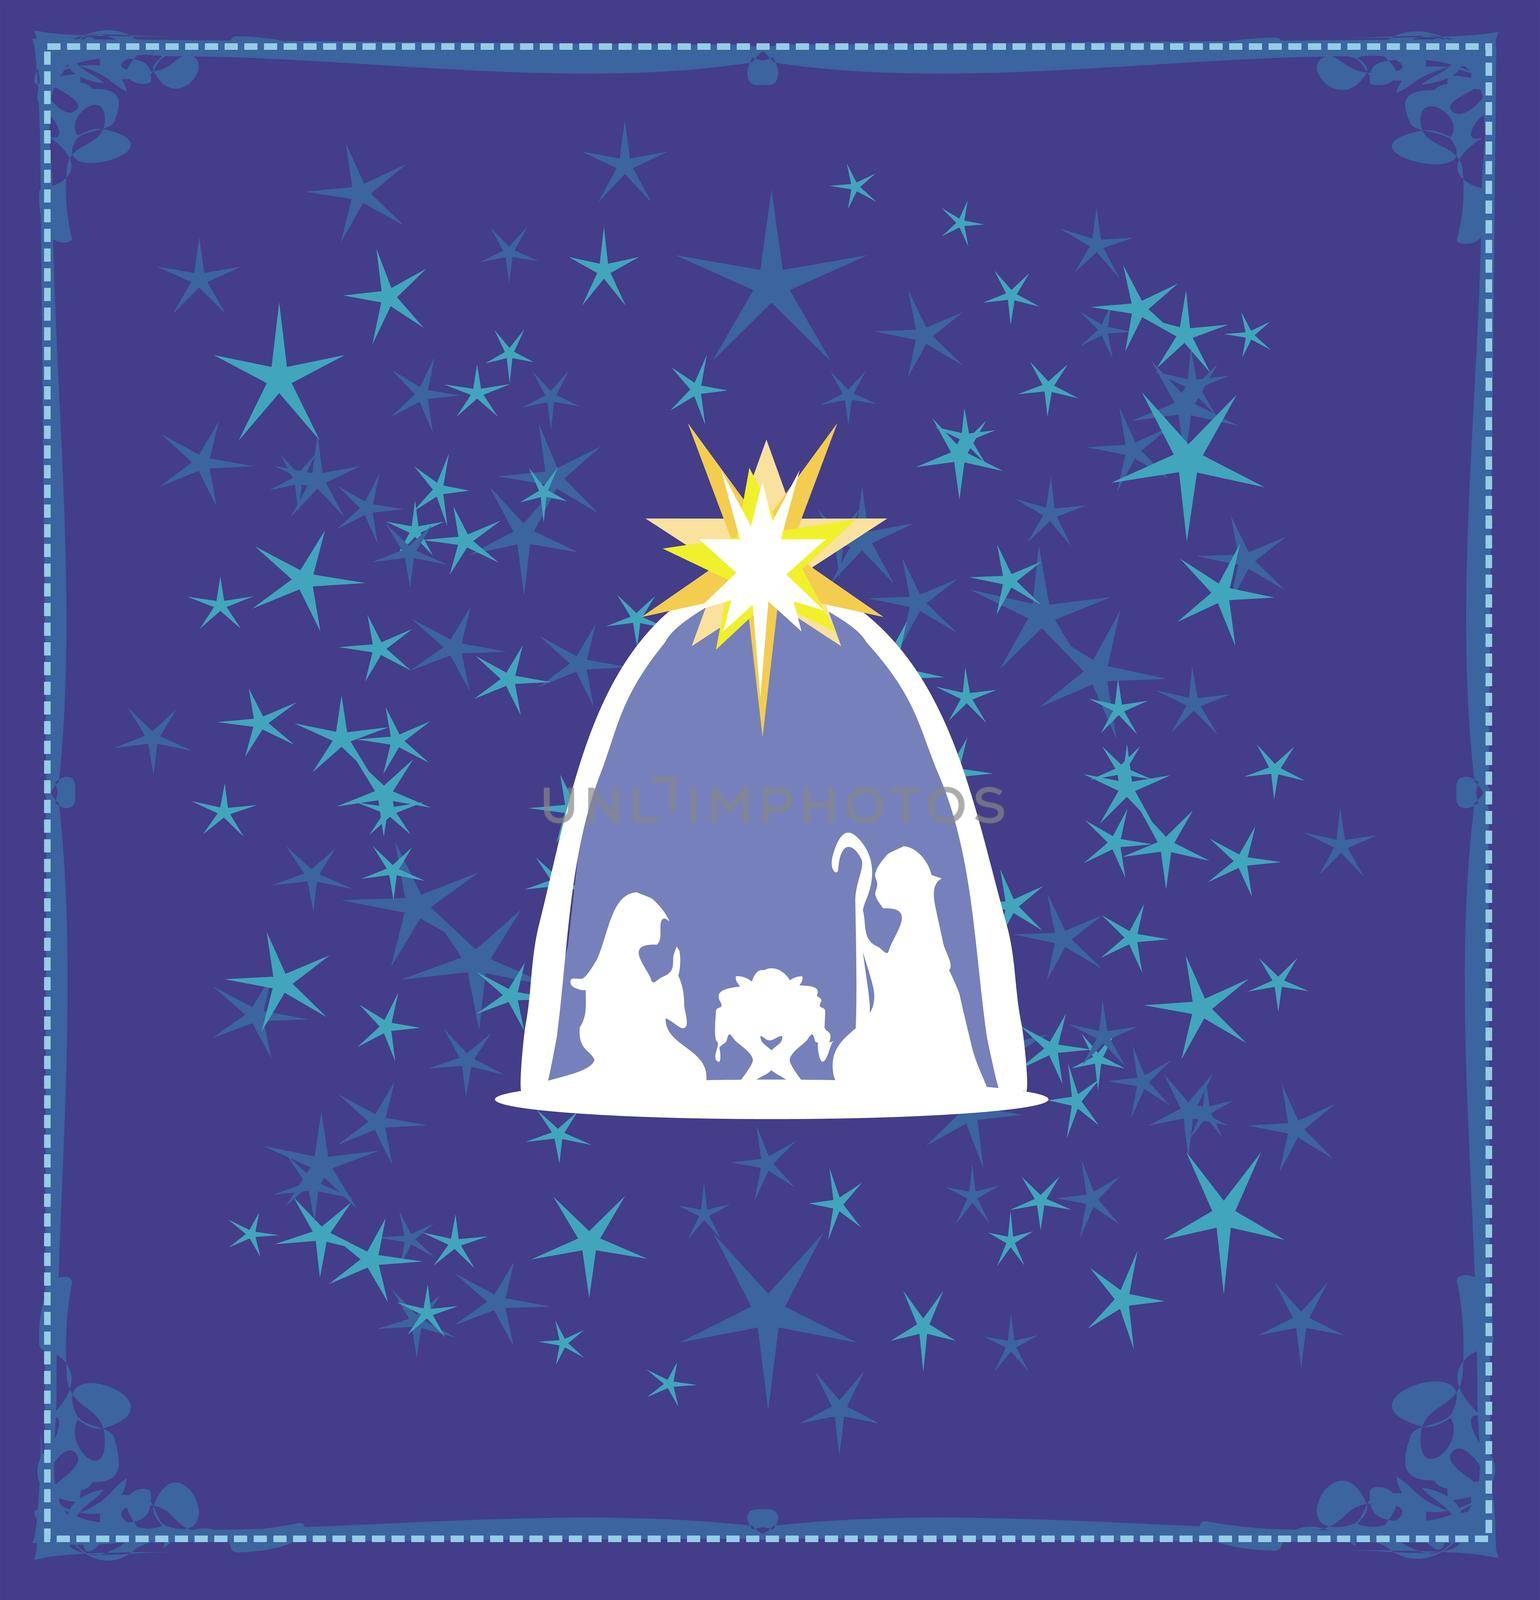 Birth of Jesus in Bethlehem - abstract, artistic card